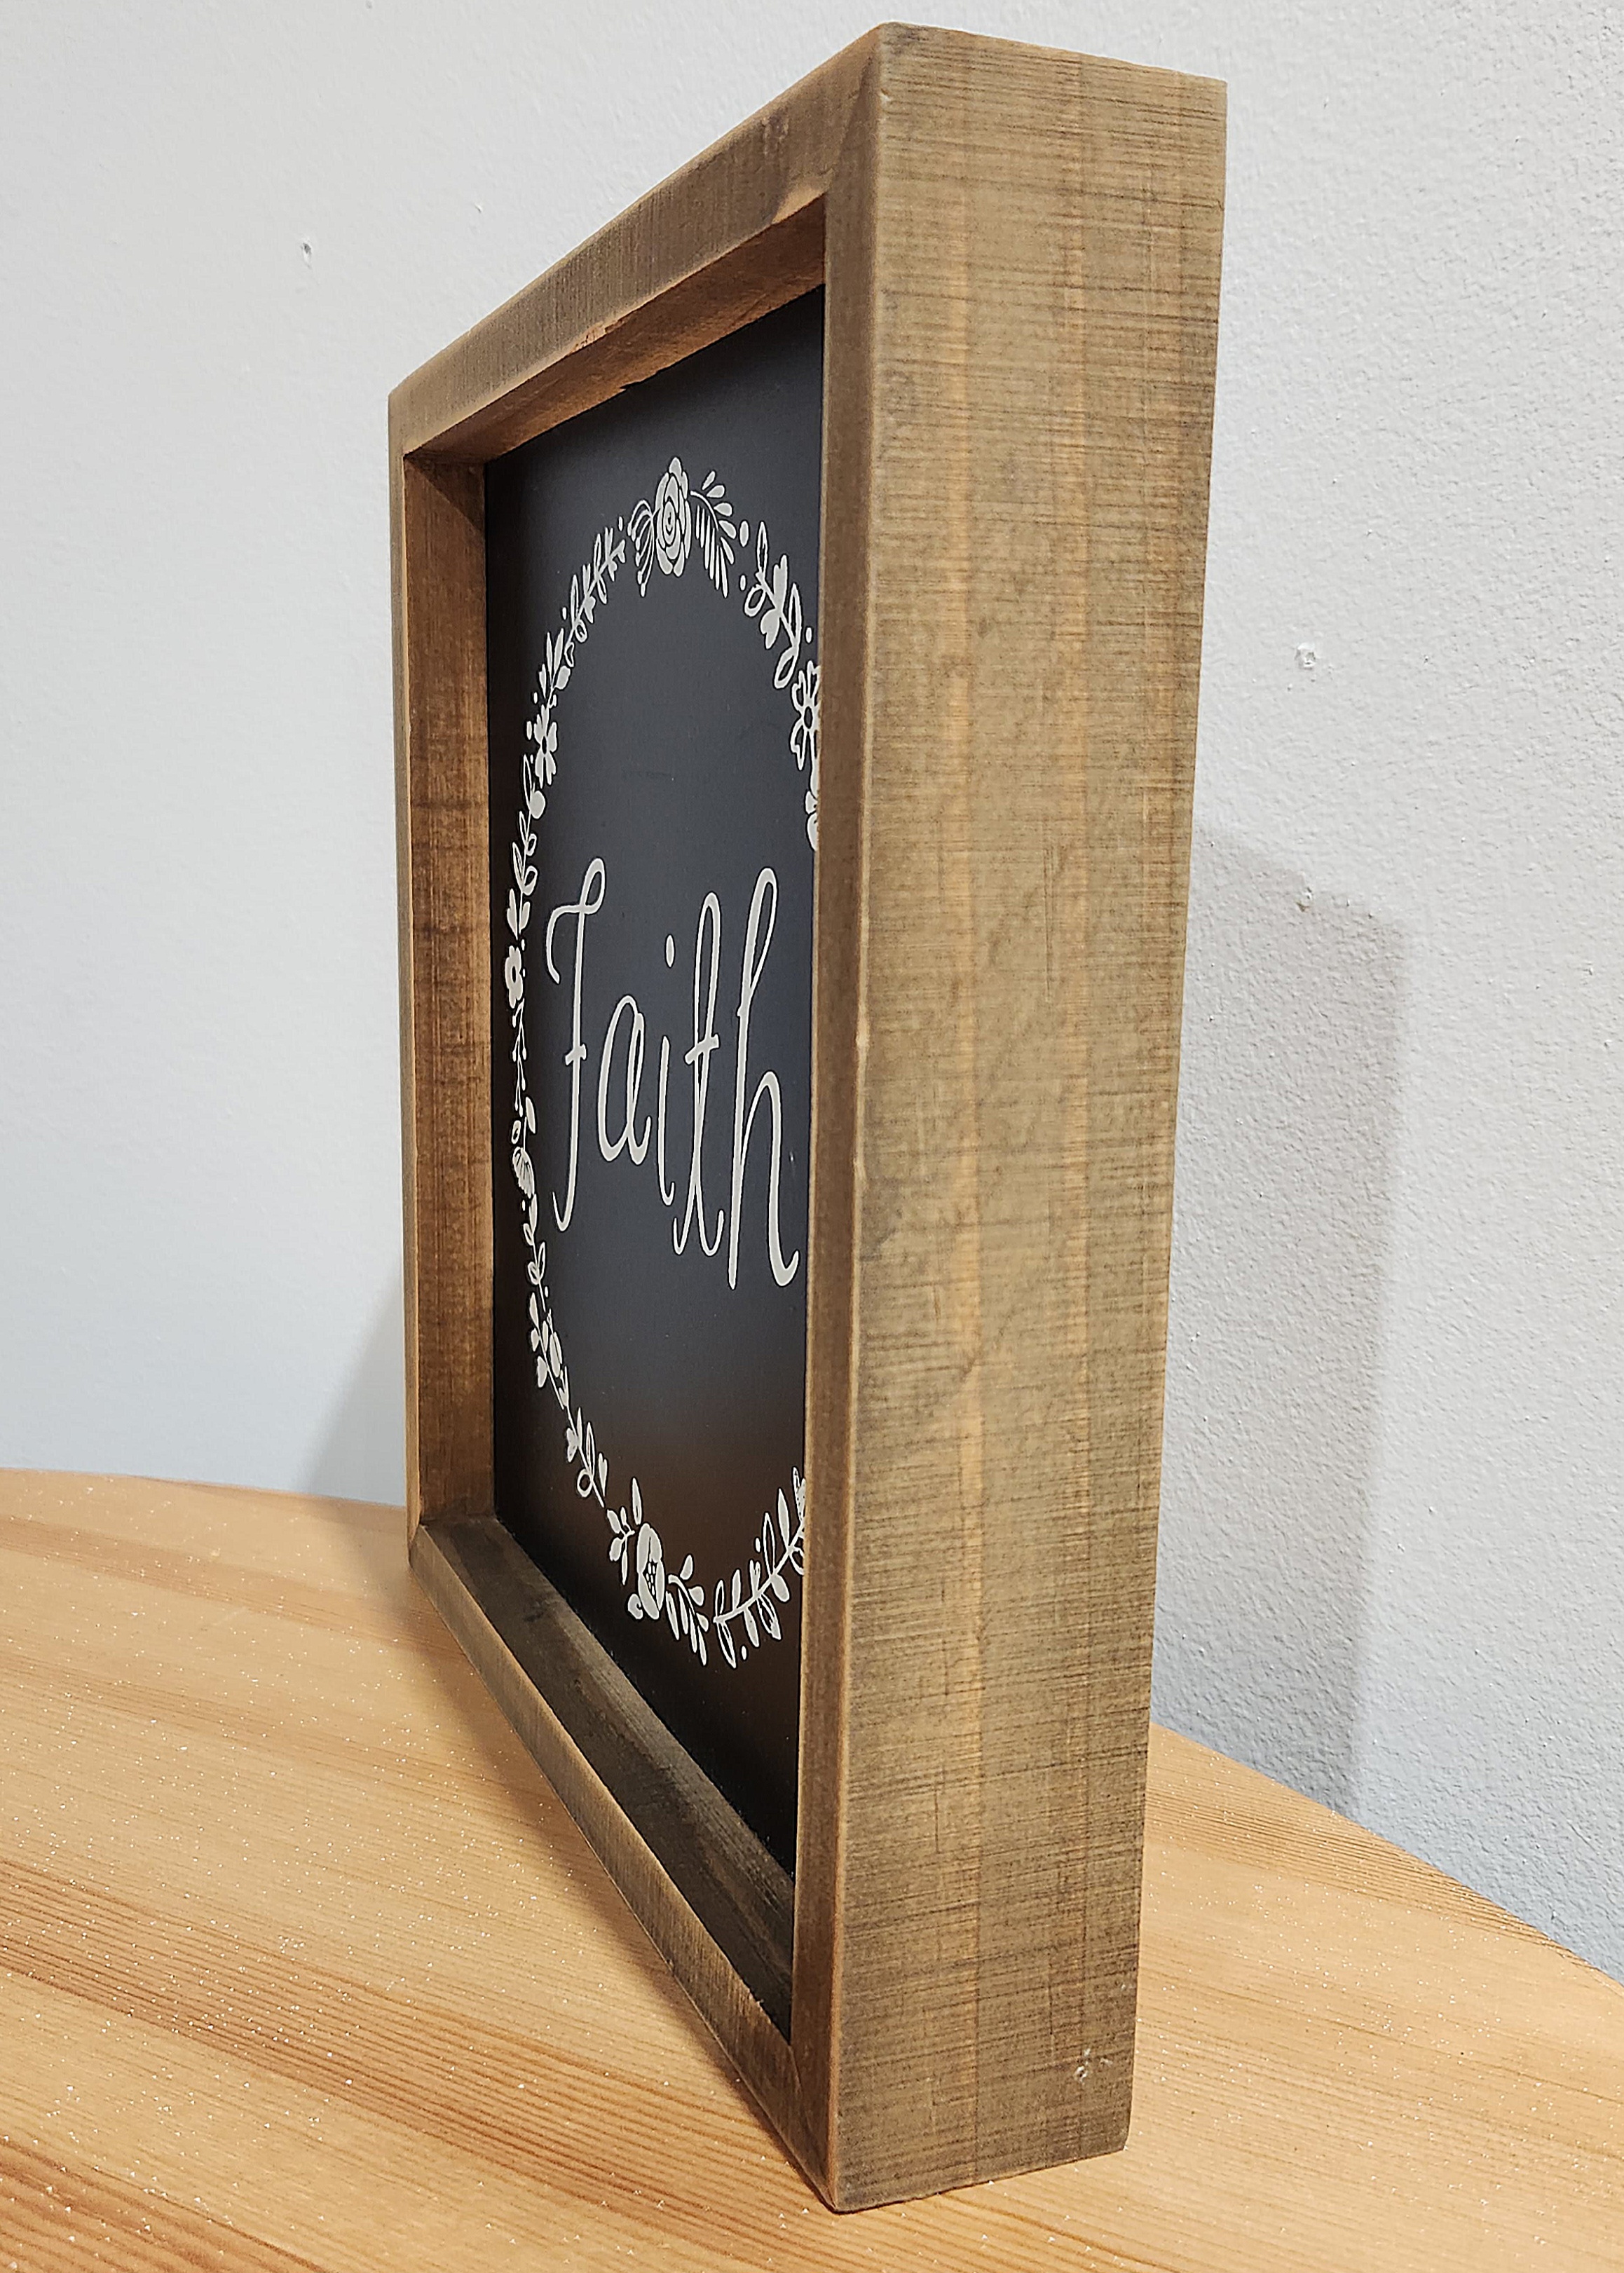 This Faith Wood Sign is made with love by Perfectly Imperfect Home Boutique! Shop more unique gift ideas today with Spots Initiatives, the best way to support creators.